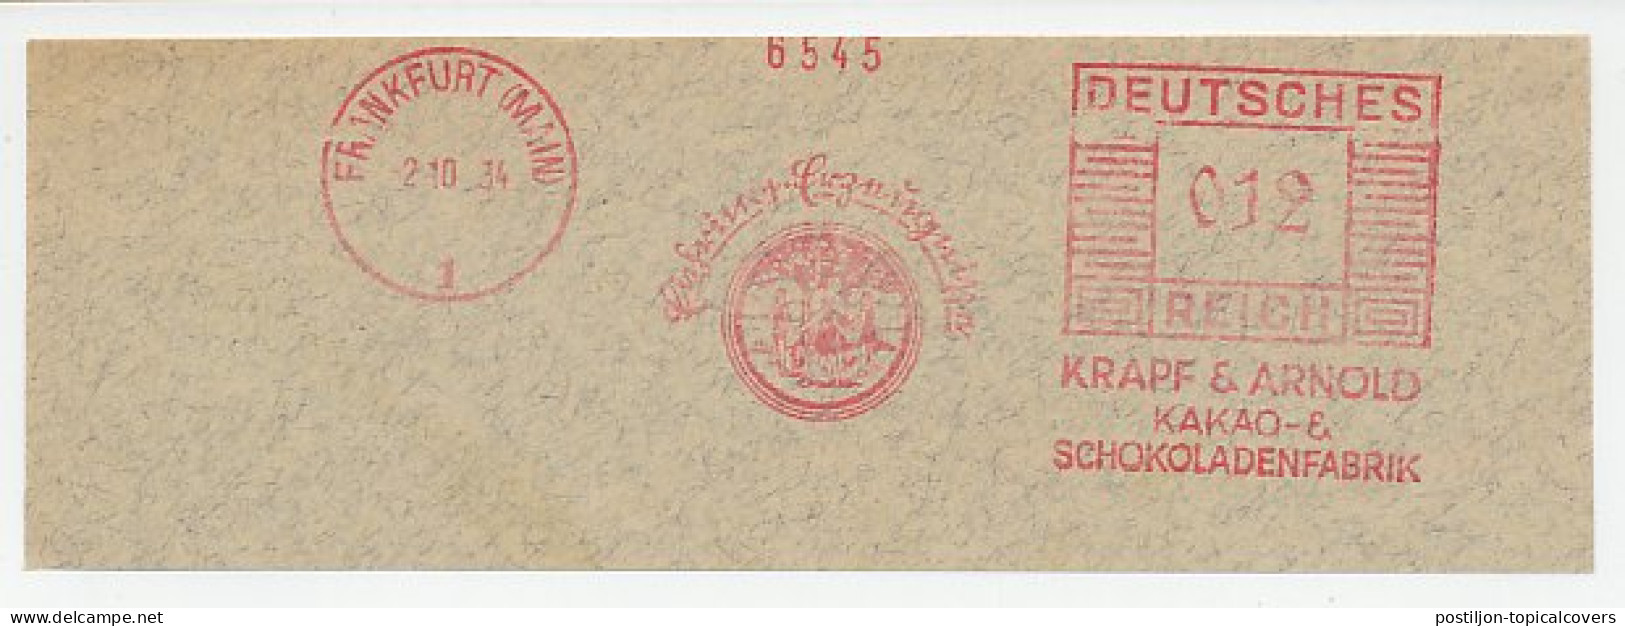 Meter Cut Deutsches Reich / Germany 1934 Chocolate - Cocoa - Alimentation